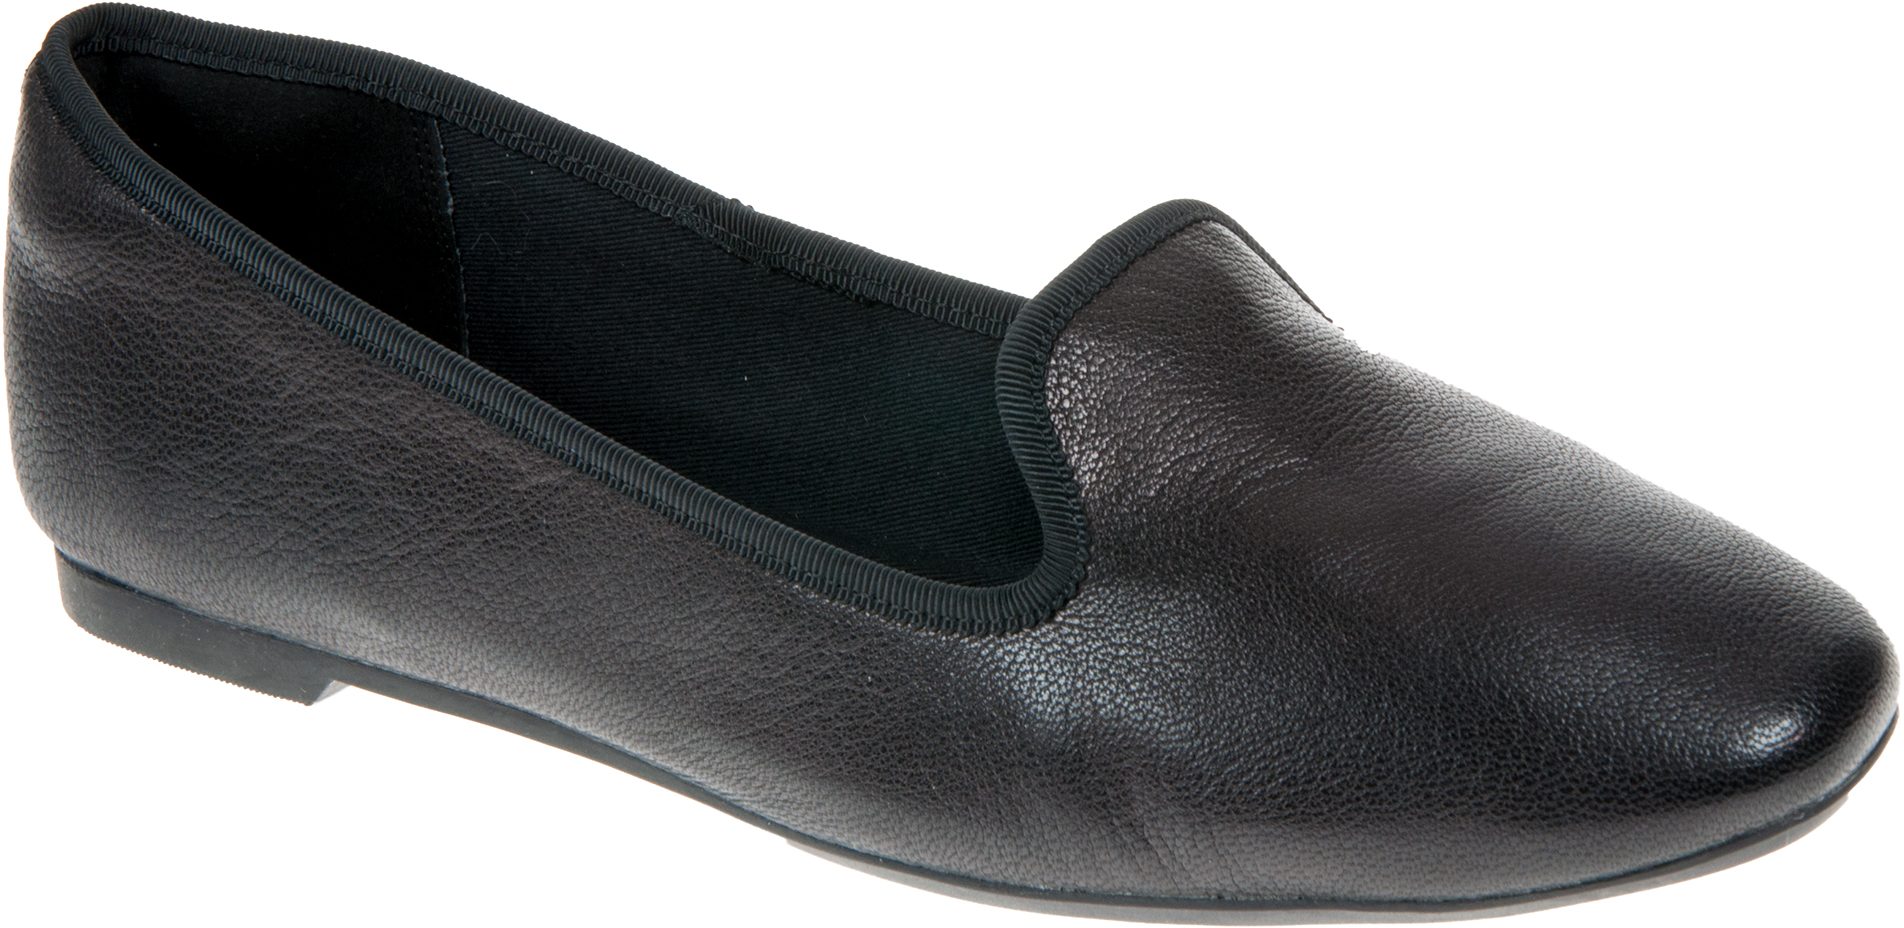 Clarks Chia Milly Black Leather 26119860 - Ballerina Shoes - Humphries ...